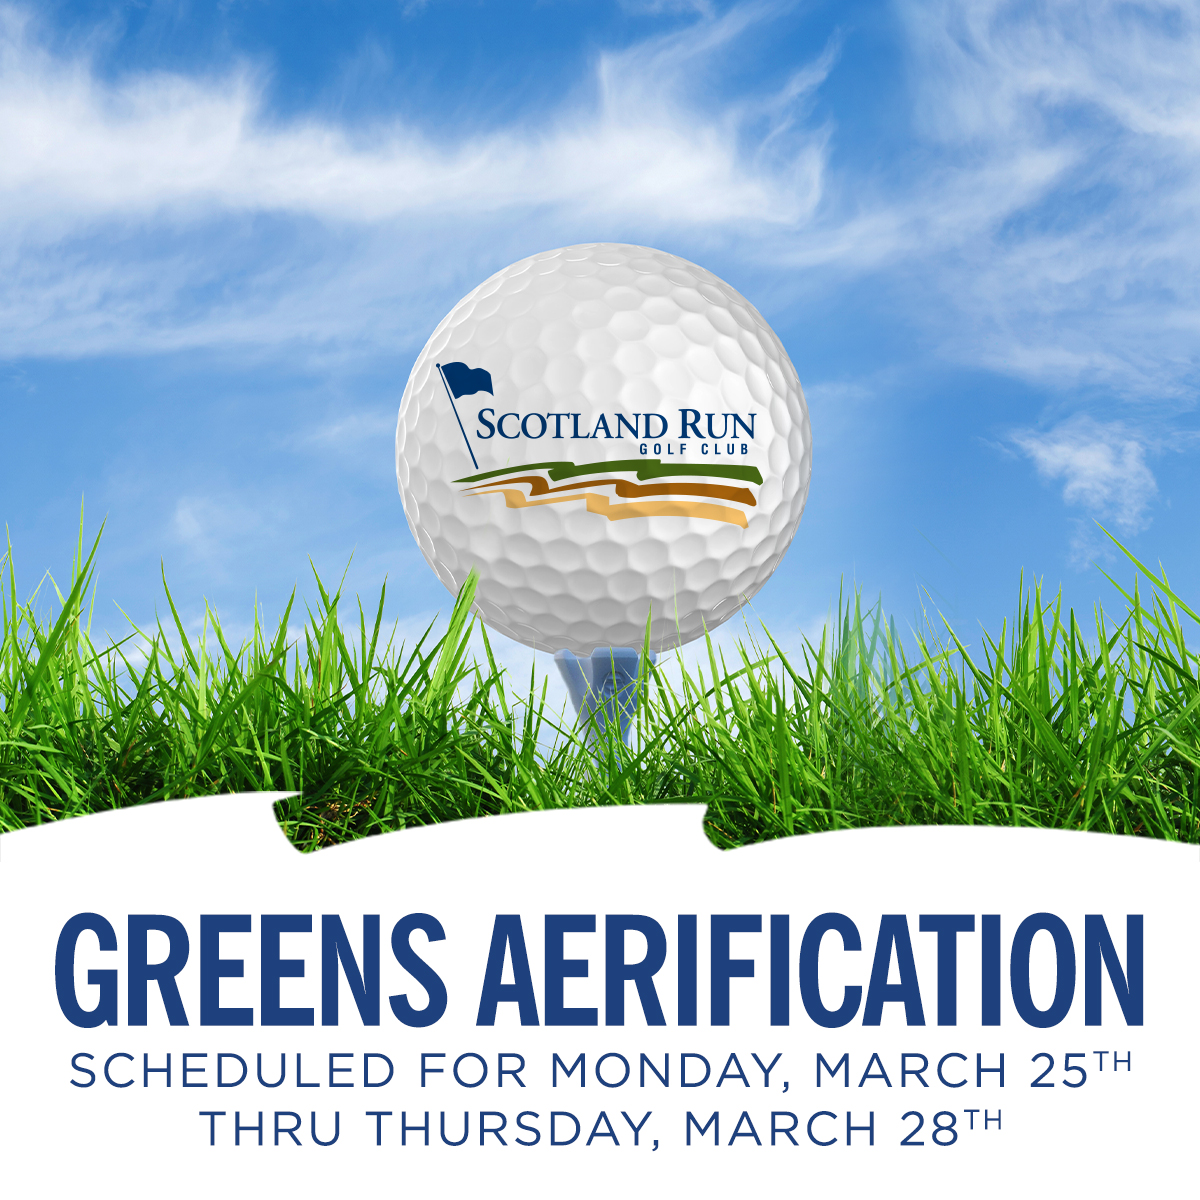 Greens aerification is scheduled for Monday, March 25 thru Thursday, March 28. But don't worry you can still play at our fellow Ottinger Golf property @BallamorGC. Book a Member Tee Time in Member Portal: brnw.ch/21wHYmH Book a Public Tee Time: brnw.ch/21wHYmI